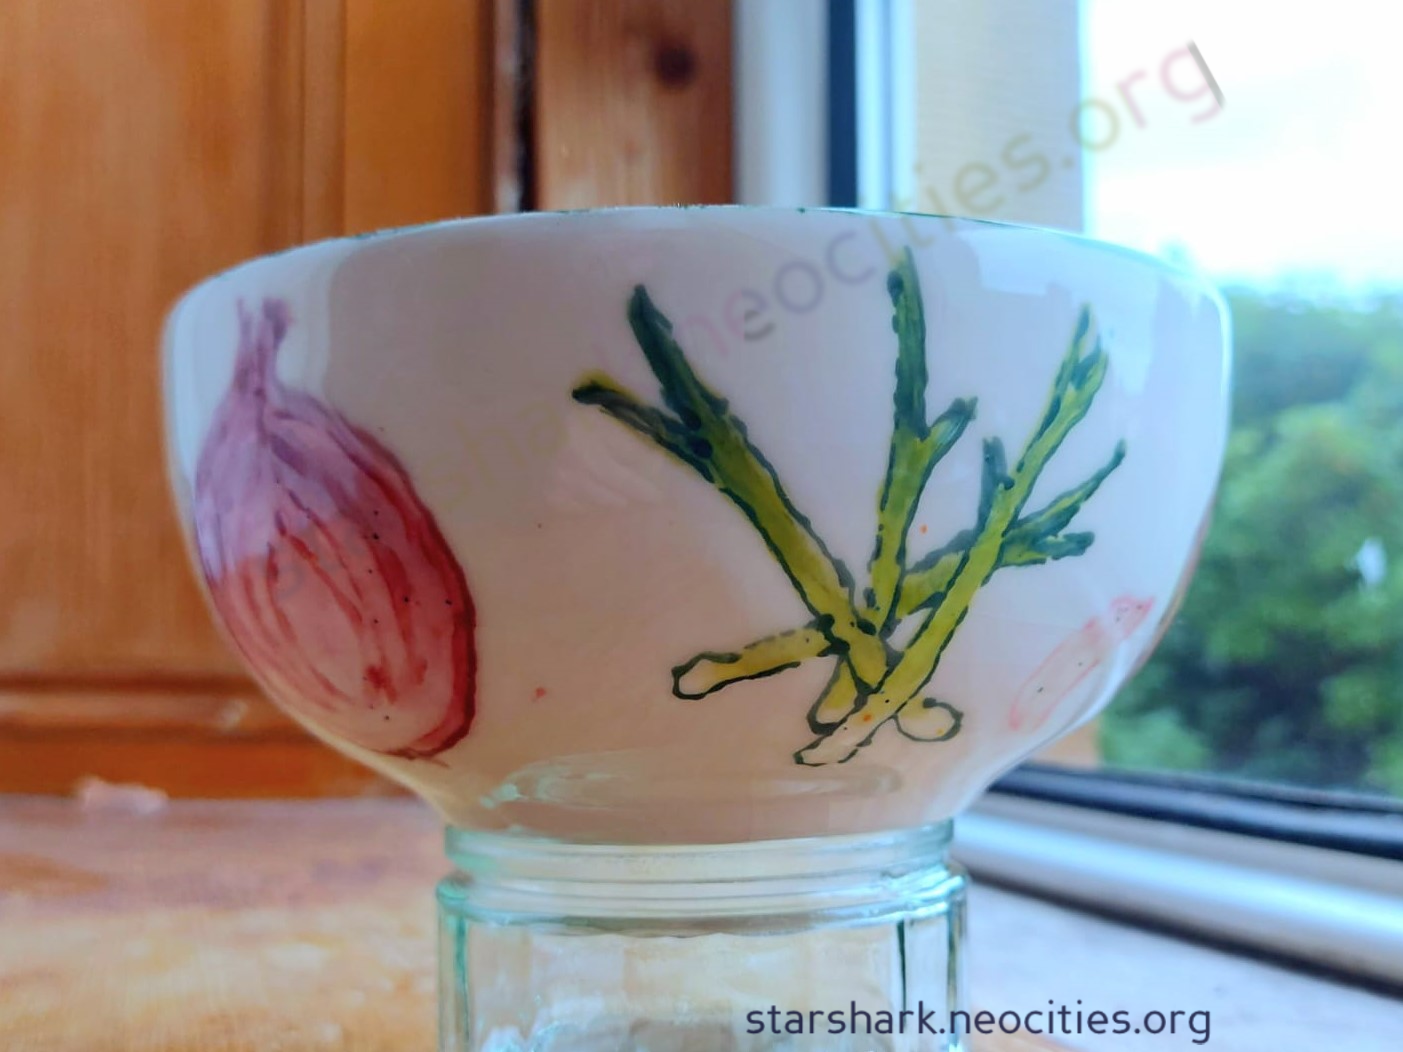 a ceramic cereal bowl painted with varius alliums: spring onions and a red onion are visible.